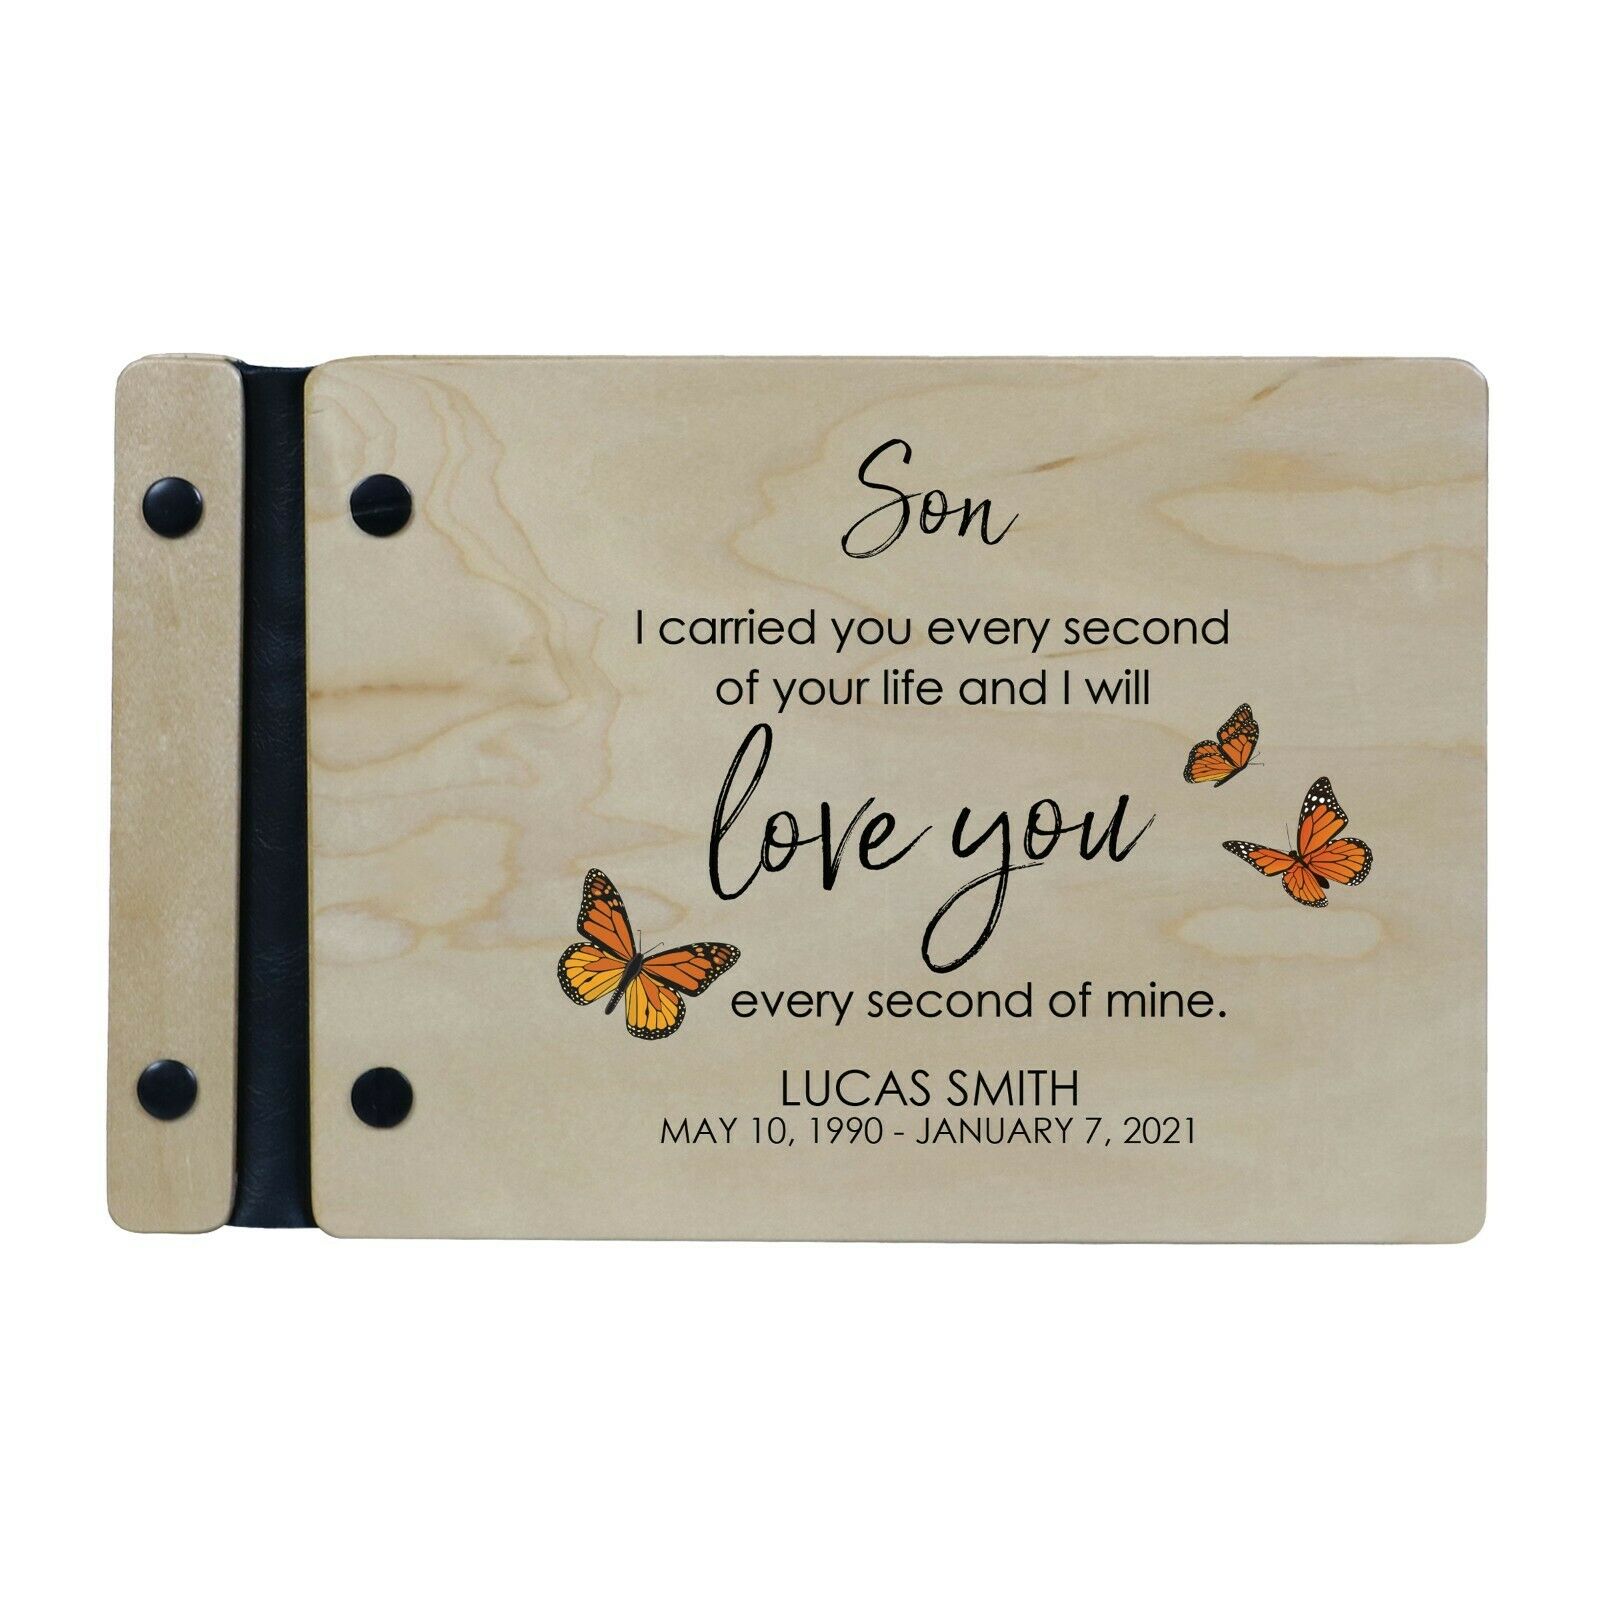 Custom Memorial Funeral Guest Book For Loss Of Loved One 9x6 - I Carried You